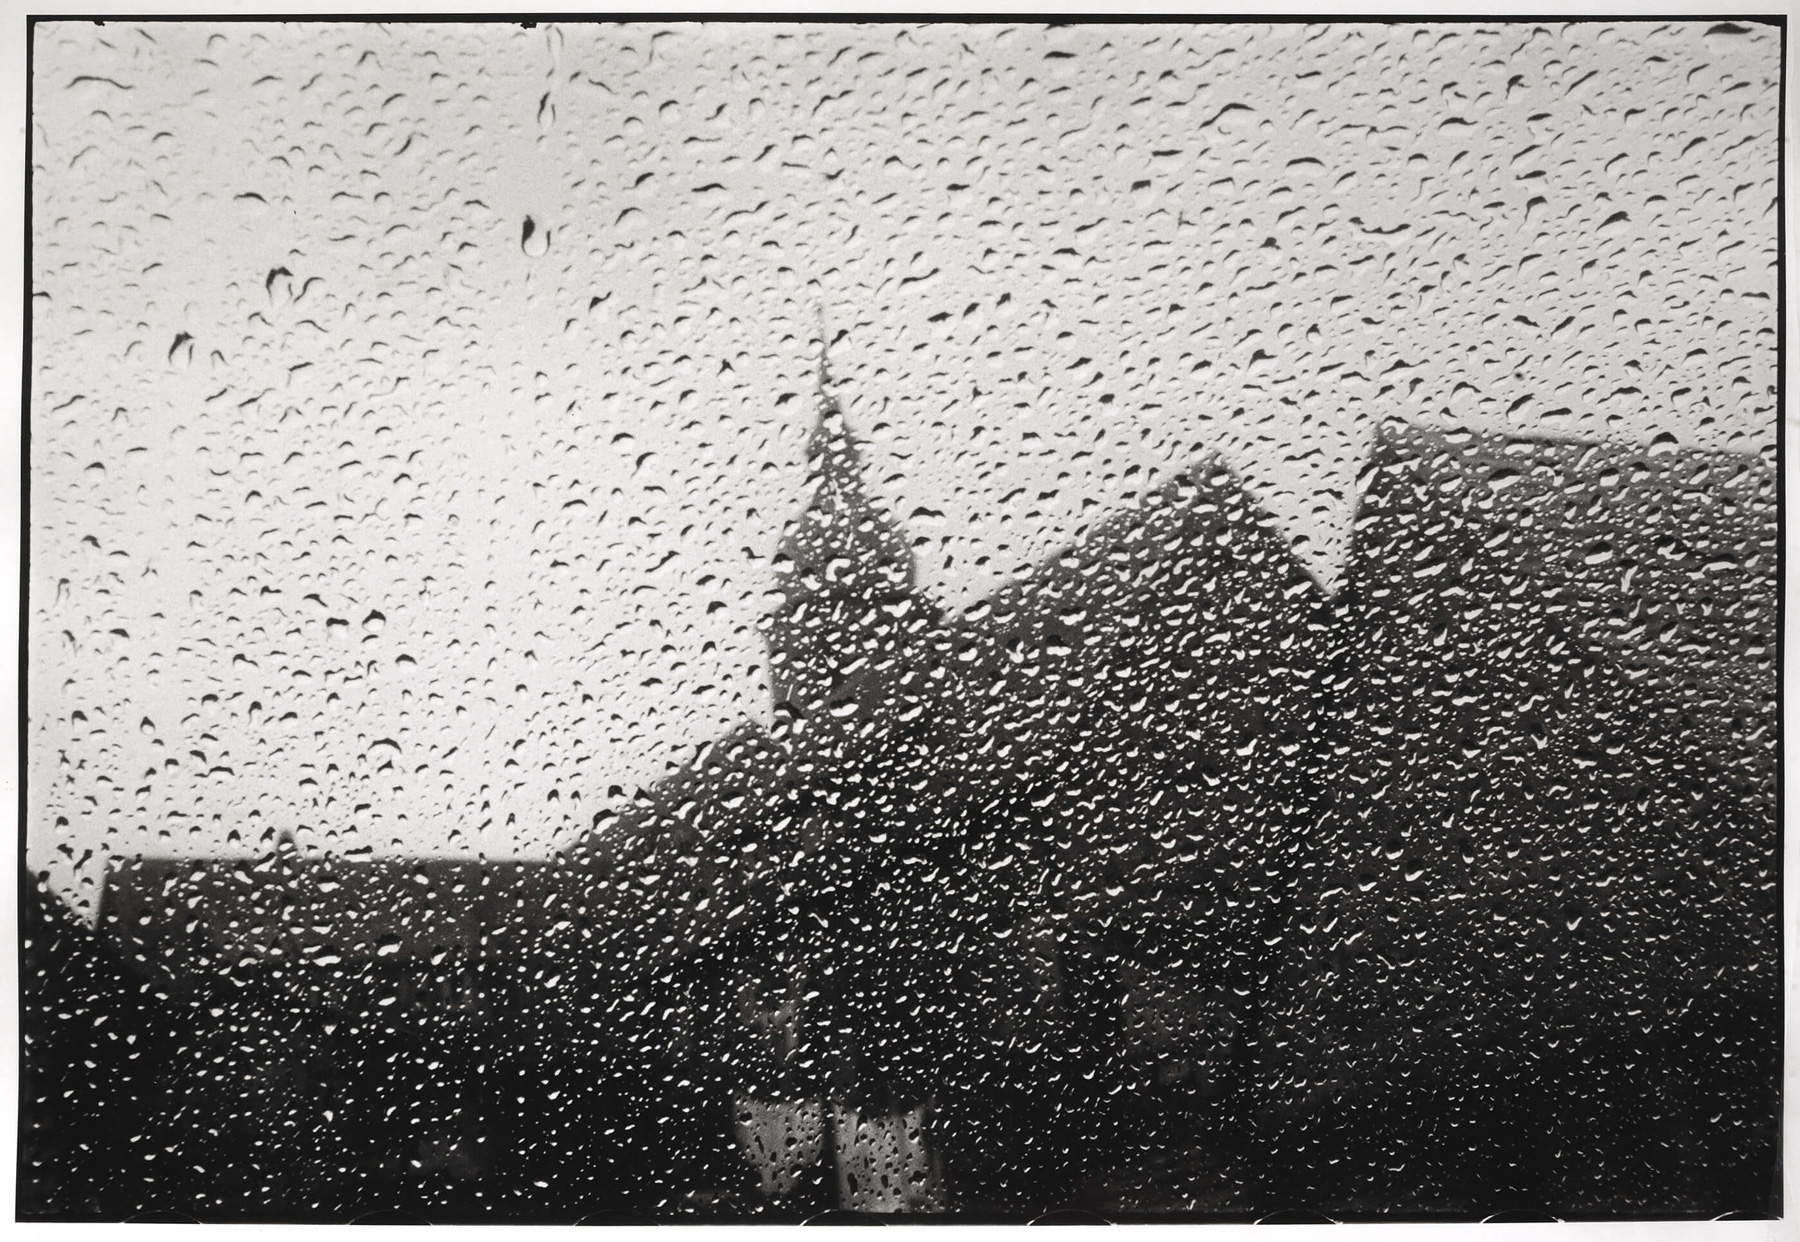 Rainy View from a Bus by Fred Maroon